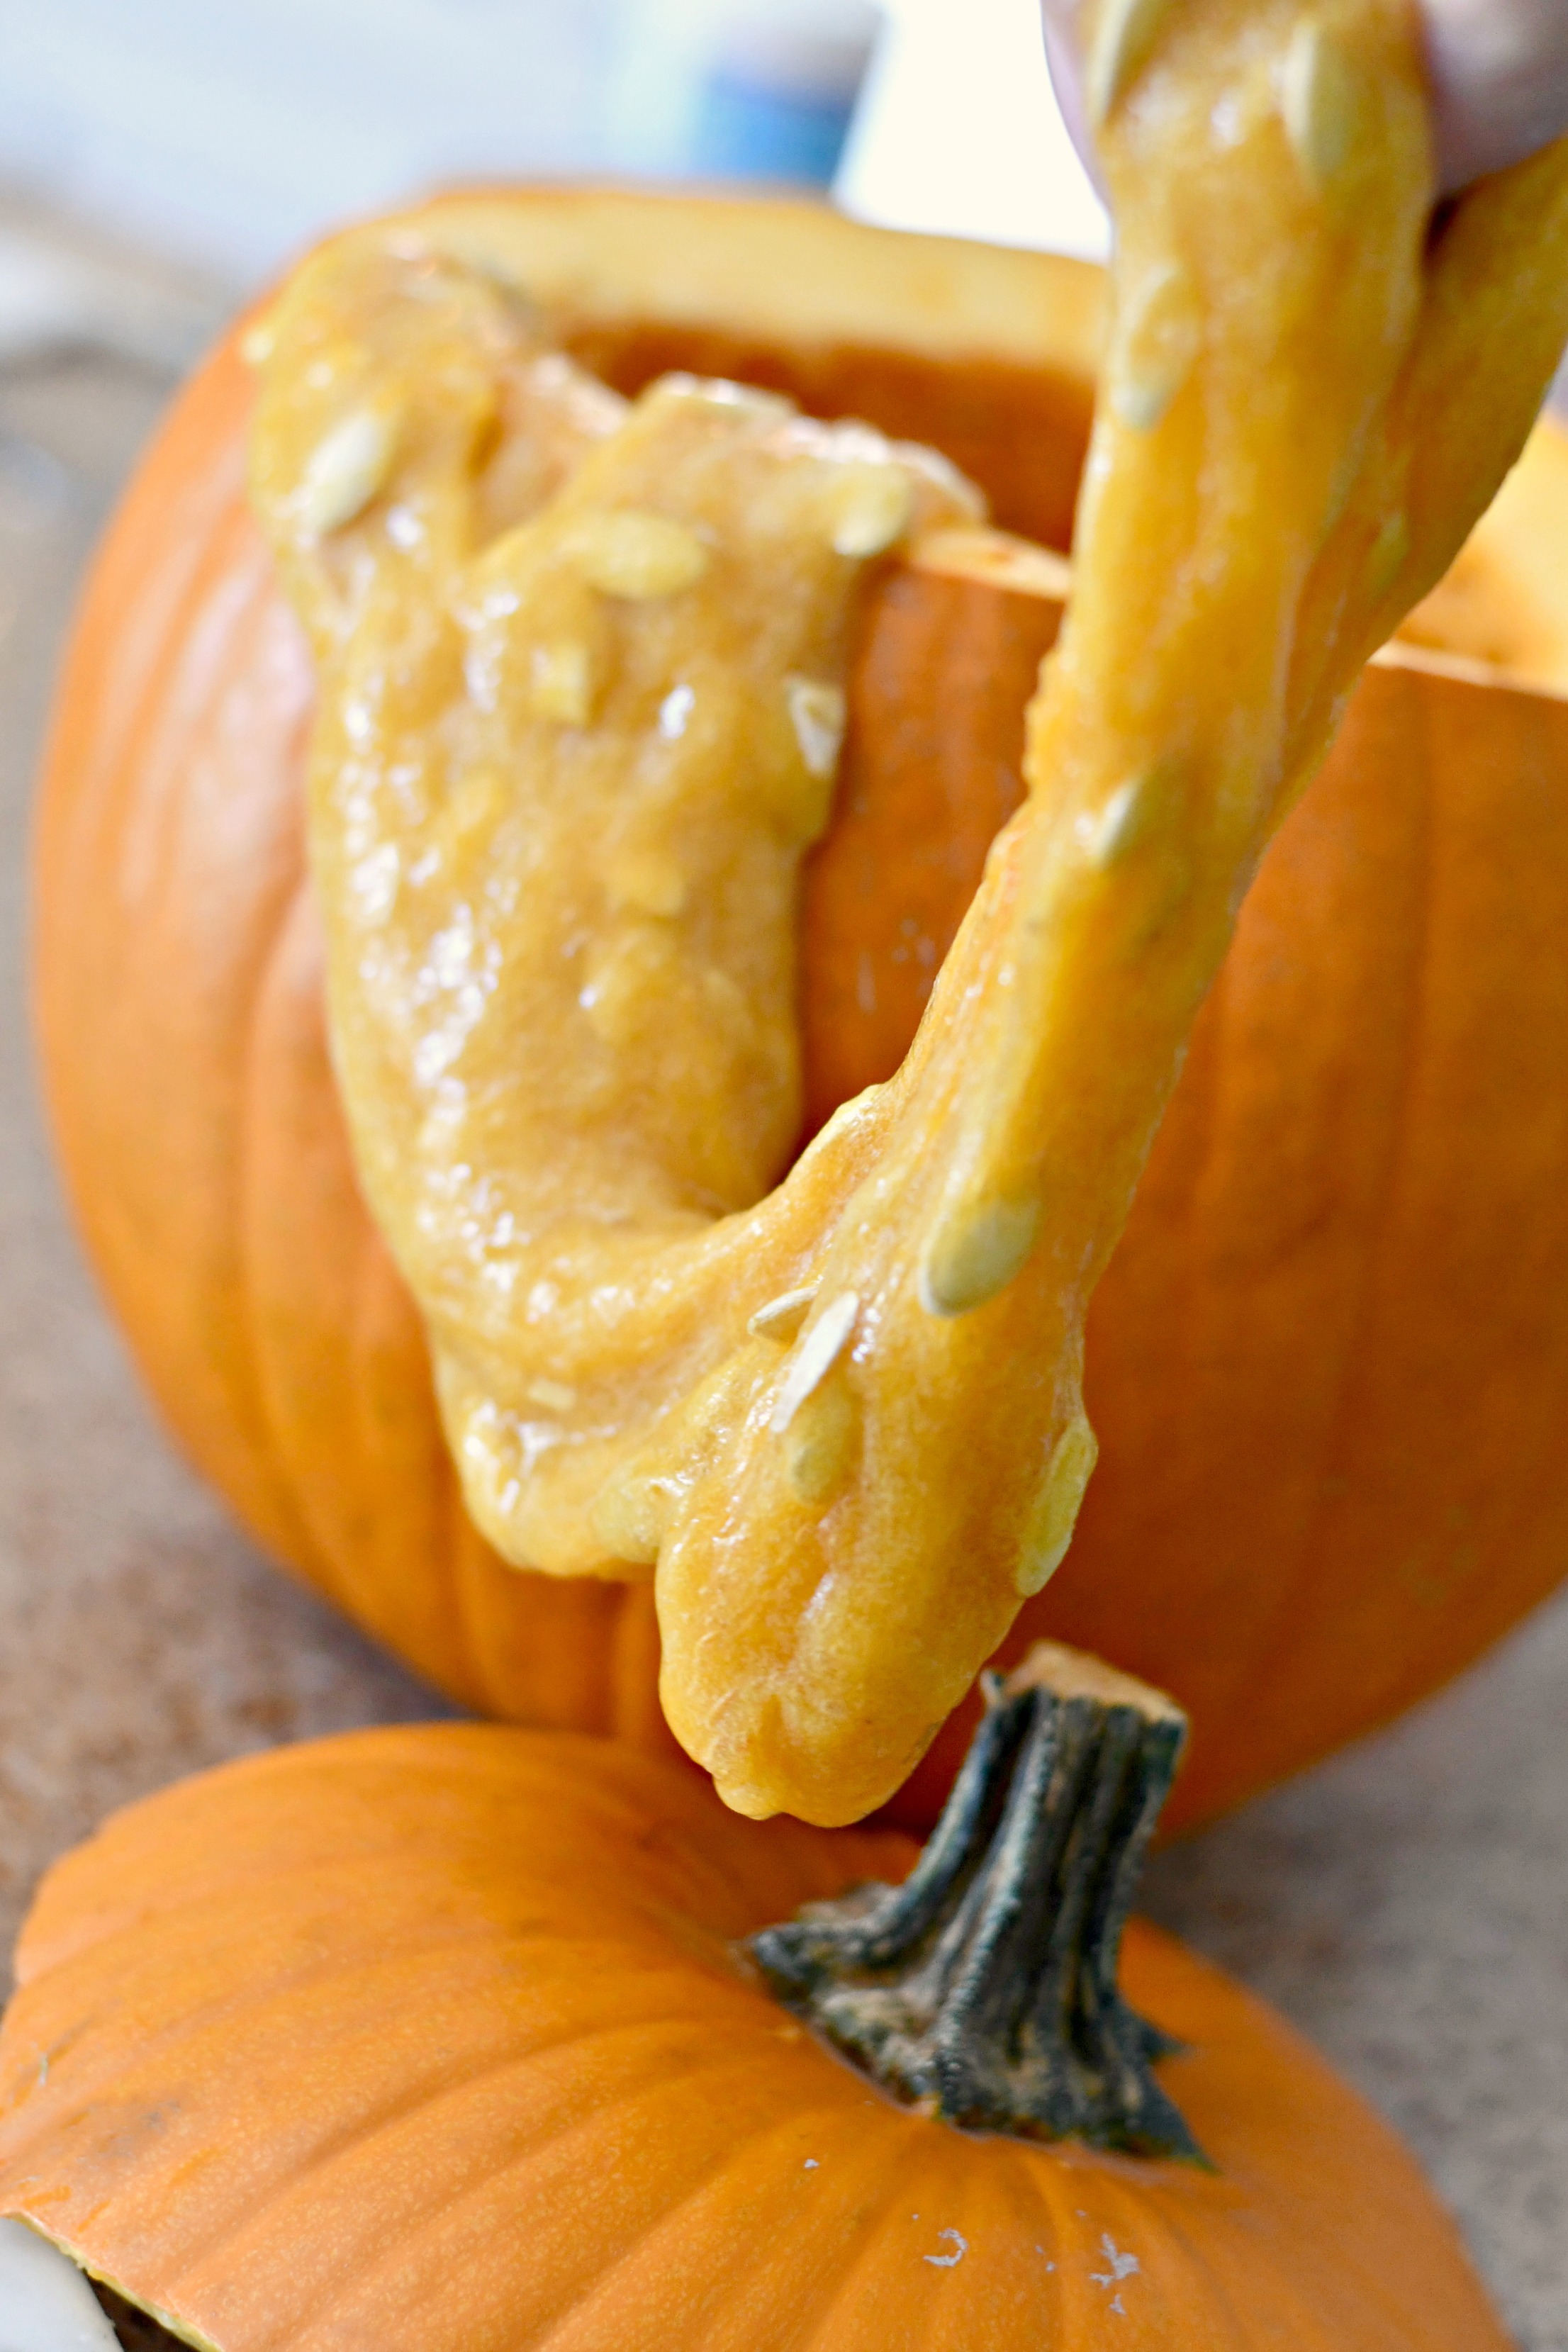 DIY Pumpkin Guts Slime – the slime pouring out of a pumpkin